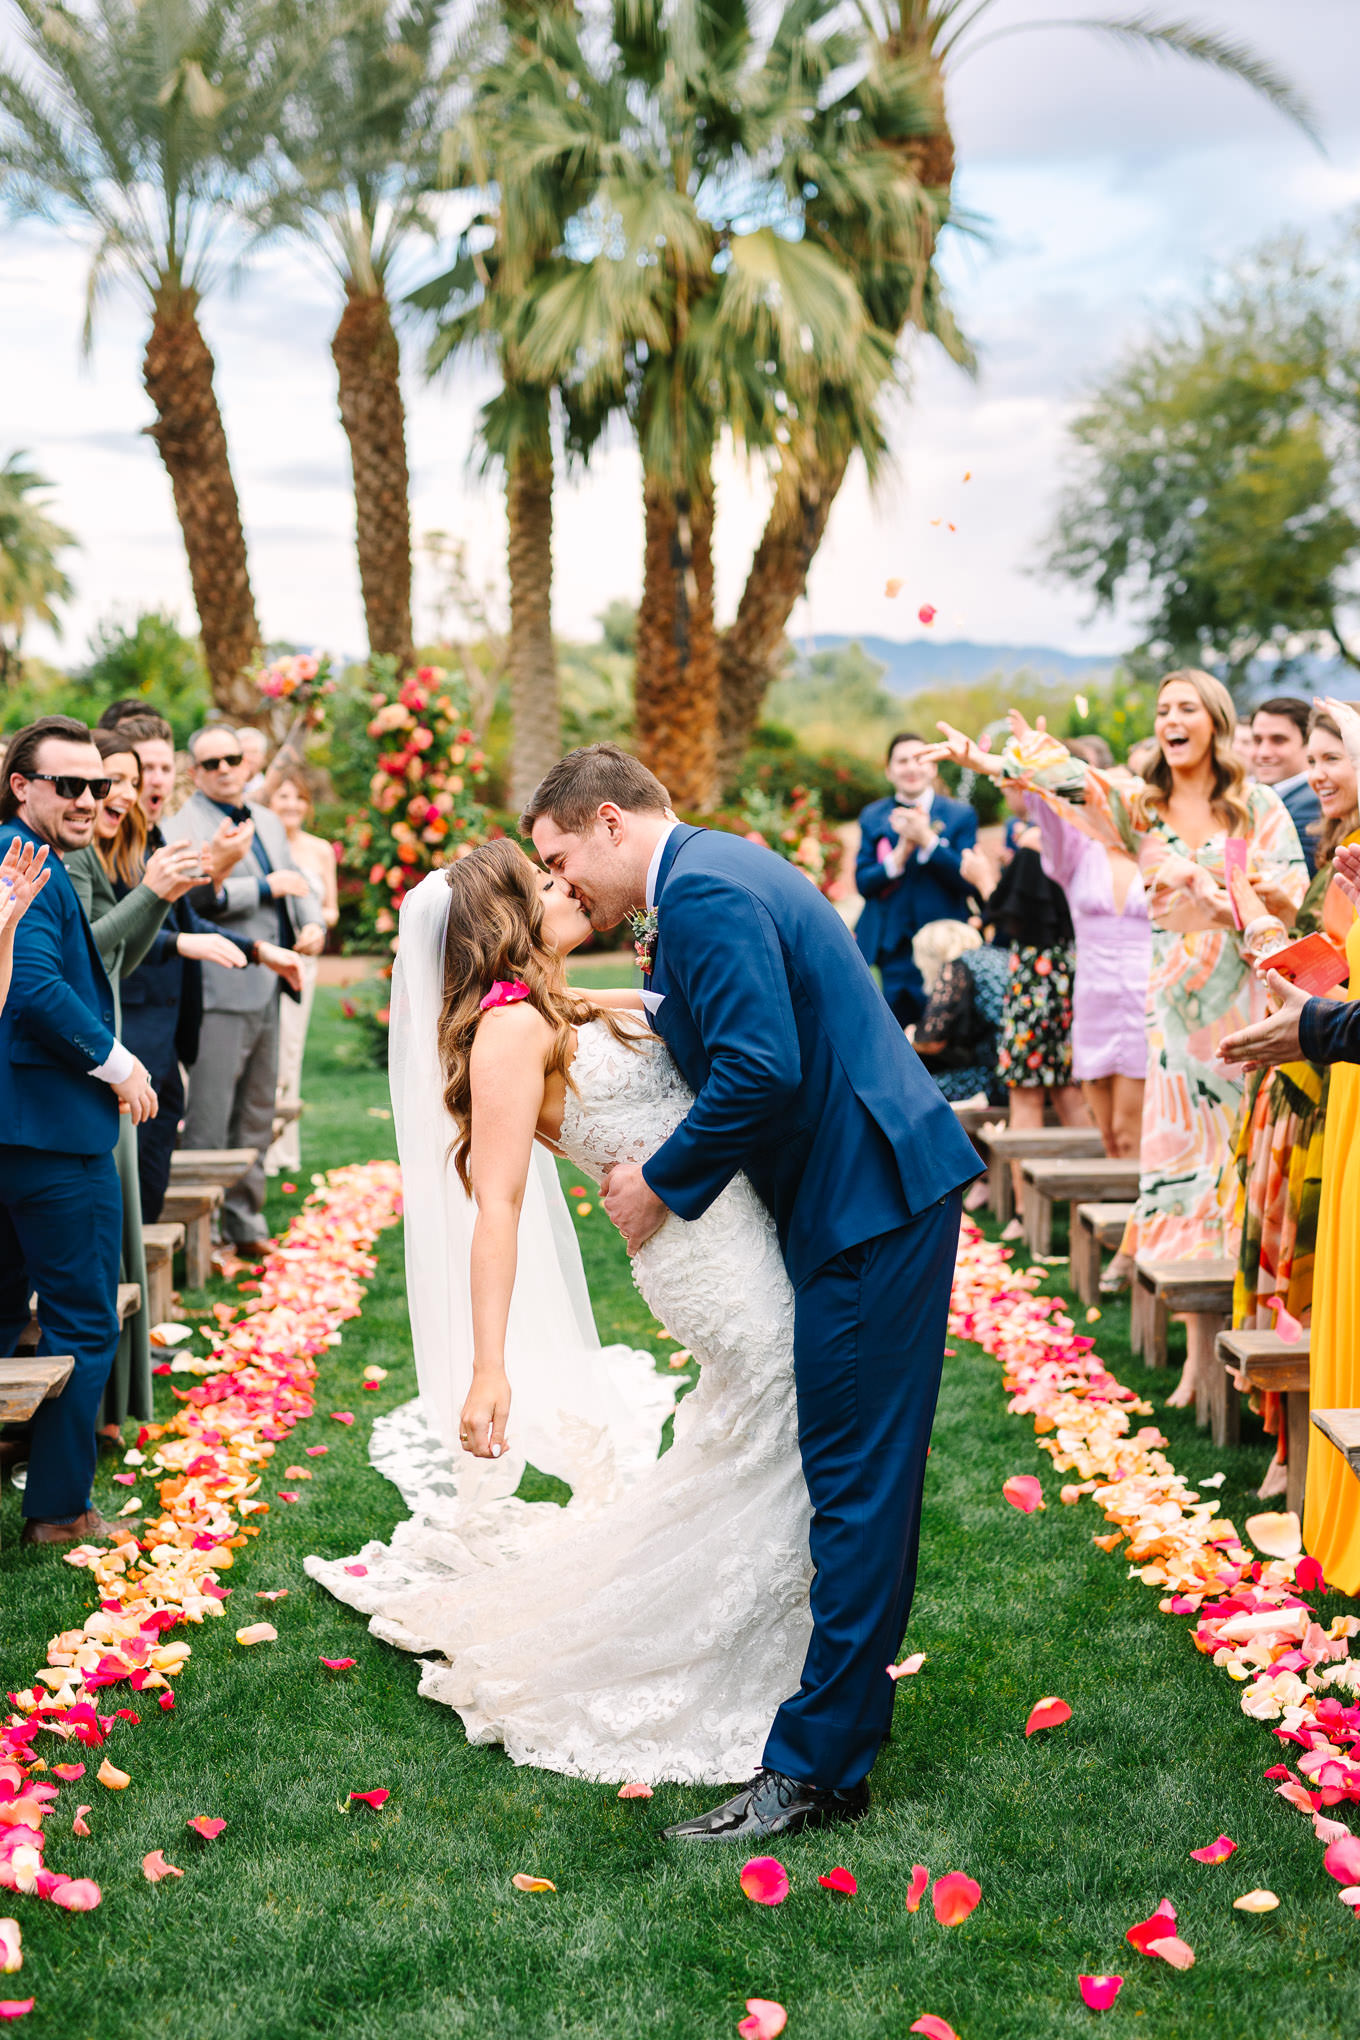 Bougainvillea Estate wedding ceremony couple kissing down the aisle | Wedding and elopement photography roundup | Los Angeles and Palm Springs photographer | #losangeleswedding #palmspringswedding #elopementphotographer Source: Mary Costa Photography | Los Angeles